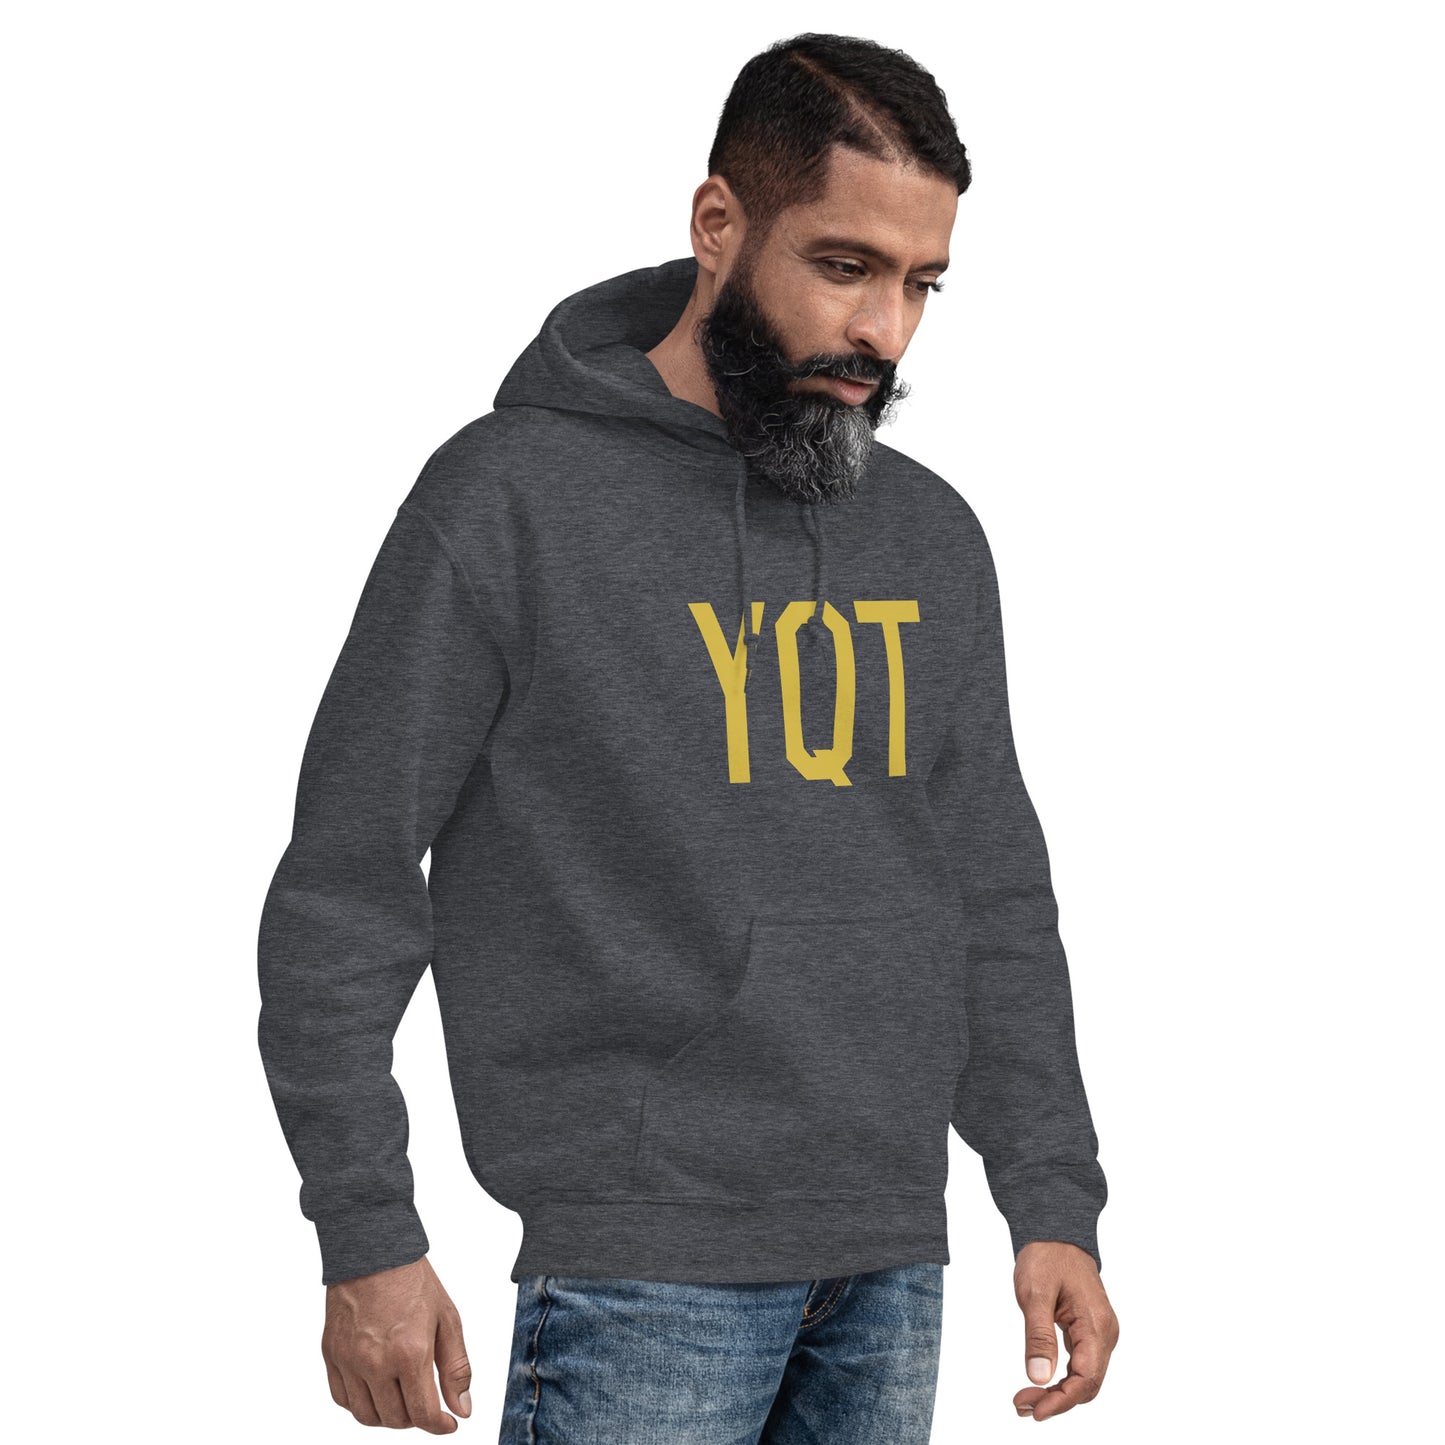 Aviation Gift Unisex Hoodie - Old Gold Graphic • YQT Thunder Bay • YHM Designs - Image 06